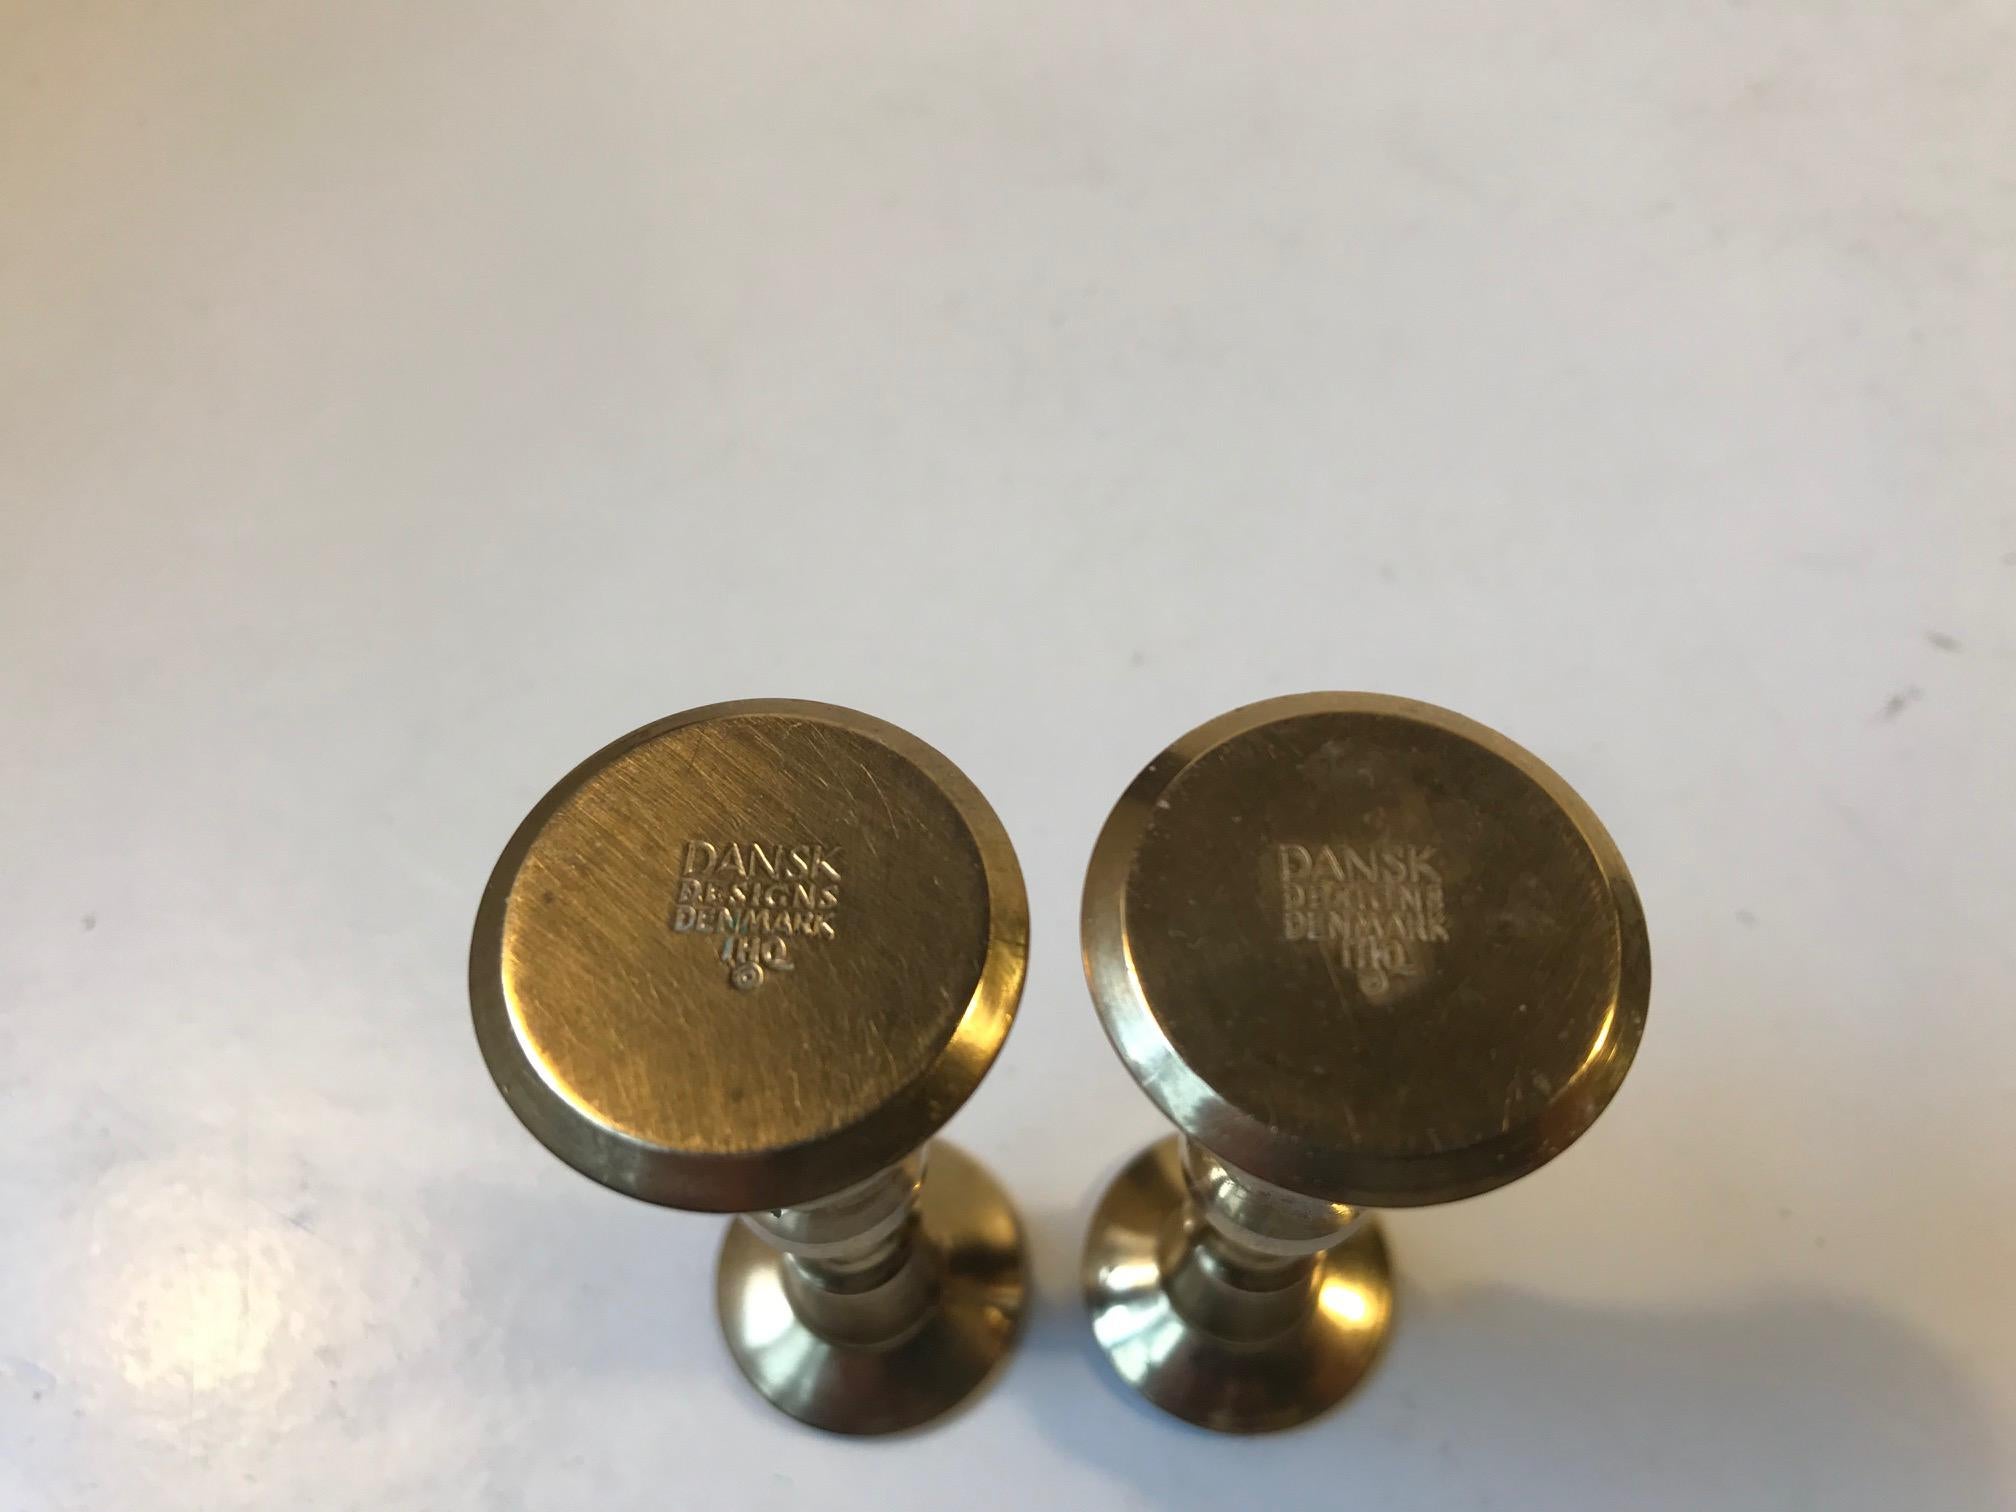 A pair of miniature candlesticks in engine turned solid brass. These are rare and was designed in the late 1950s by Danish Industrial design icon Jens Harald Quistgaard (IHQ). They are to be used with thin and long candles. Both of them fully marked